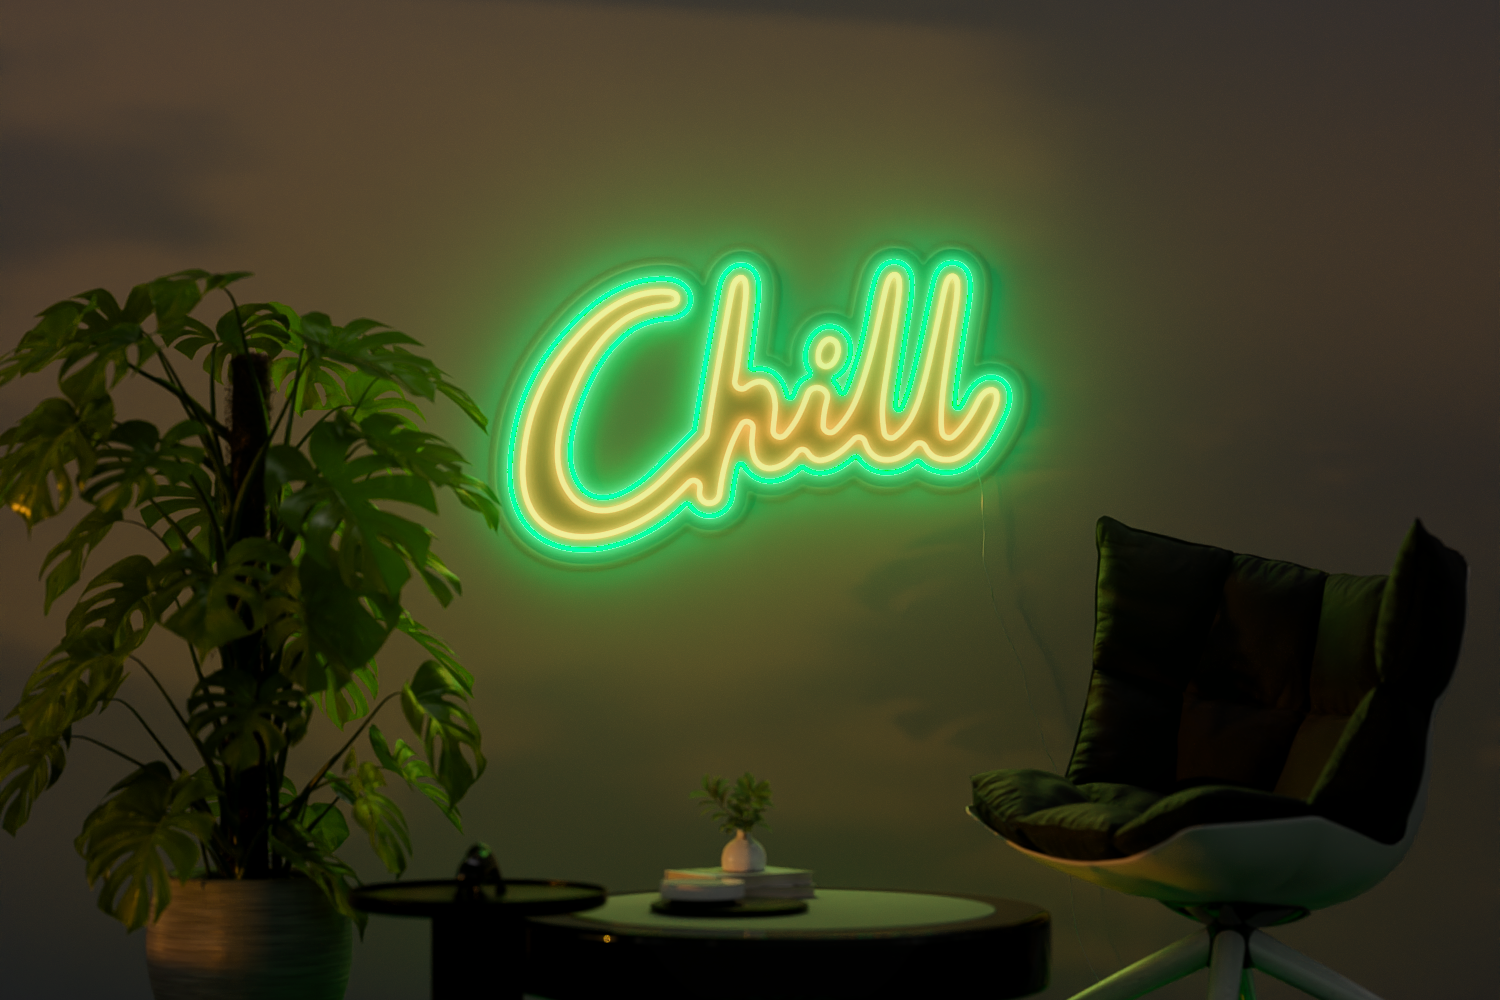 a neon sign that says "chill"